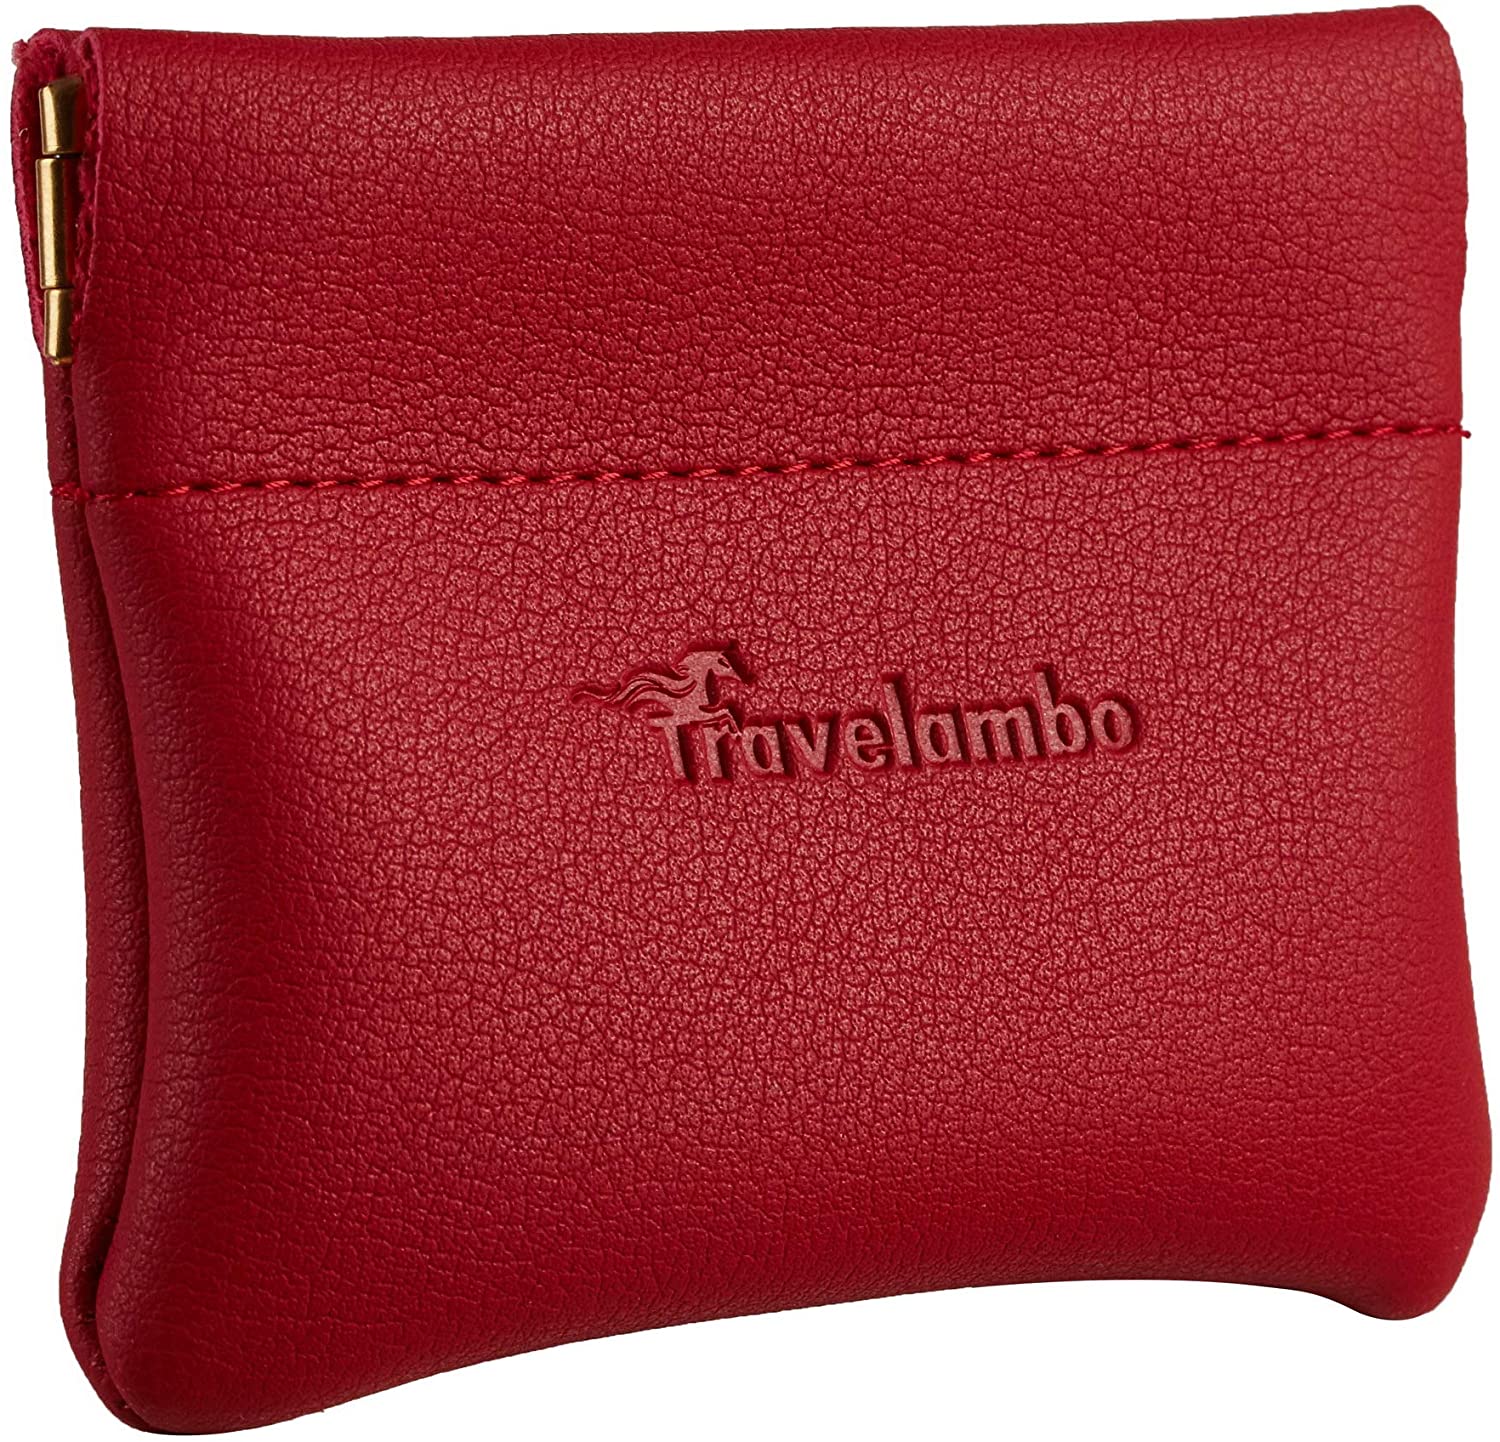 Travelambo Leather Squeeze Coin Purse Pouch